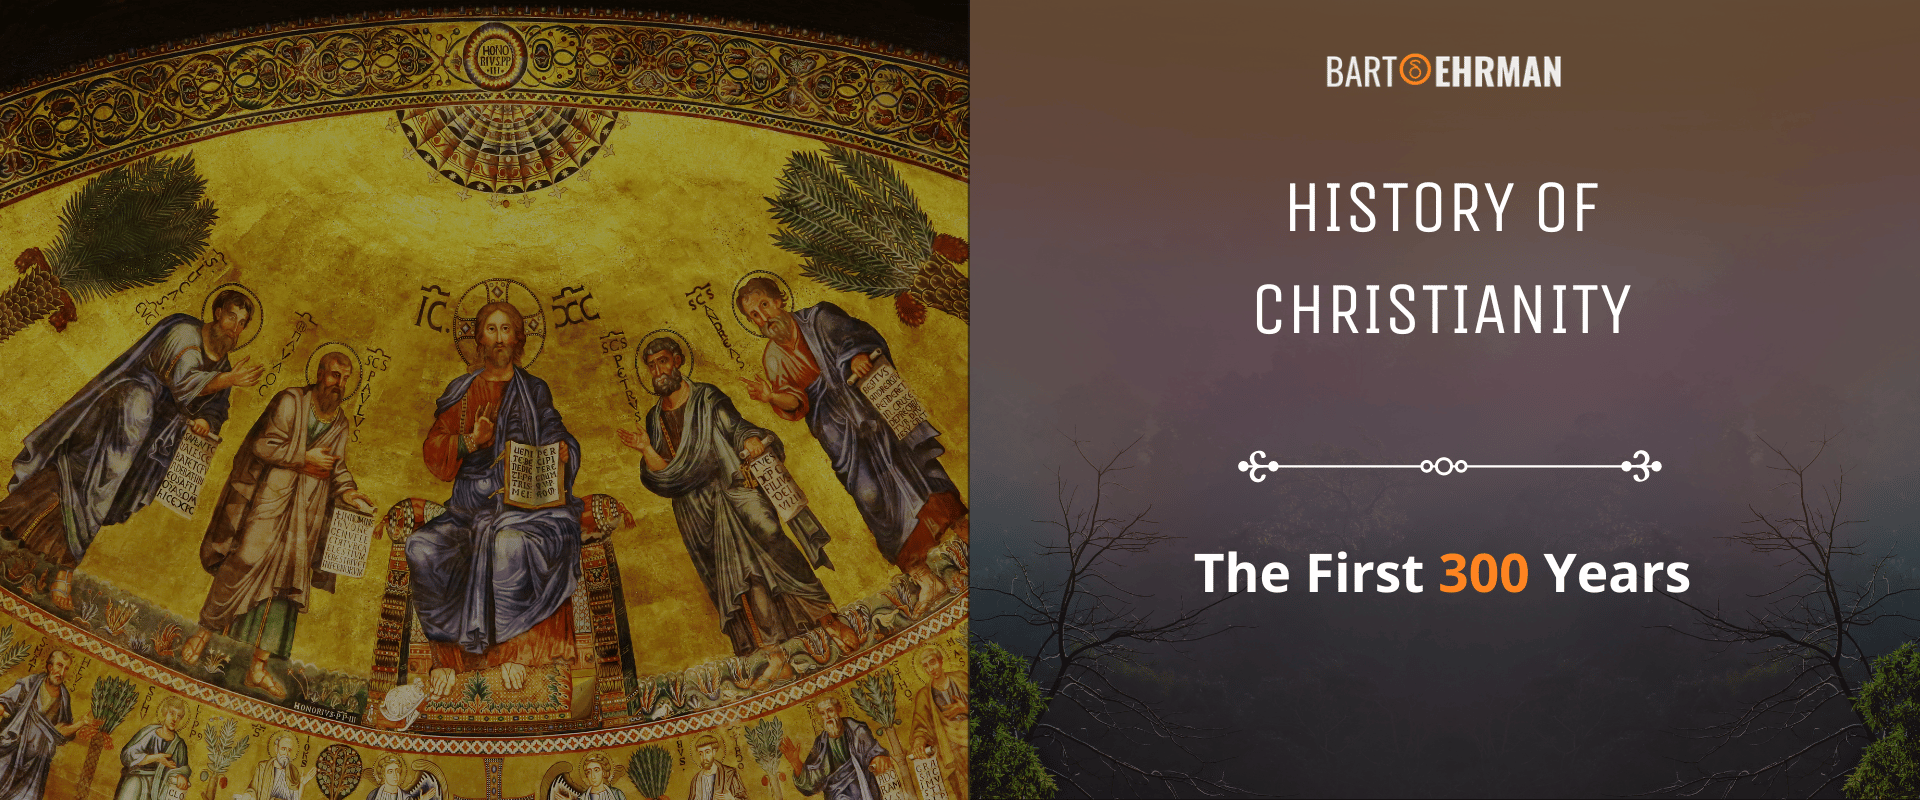 History of Christianity - The First 300 Years